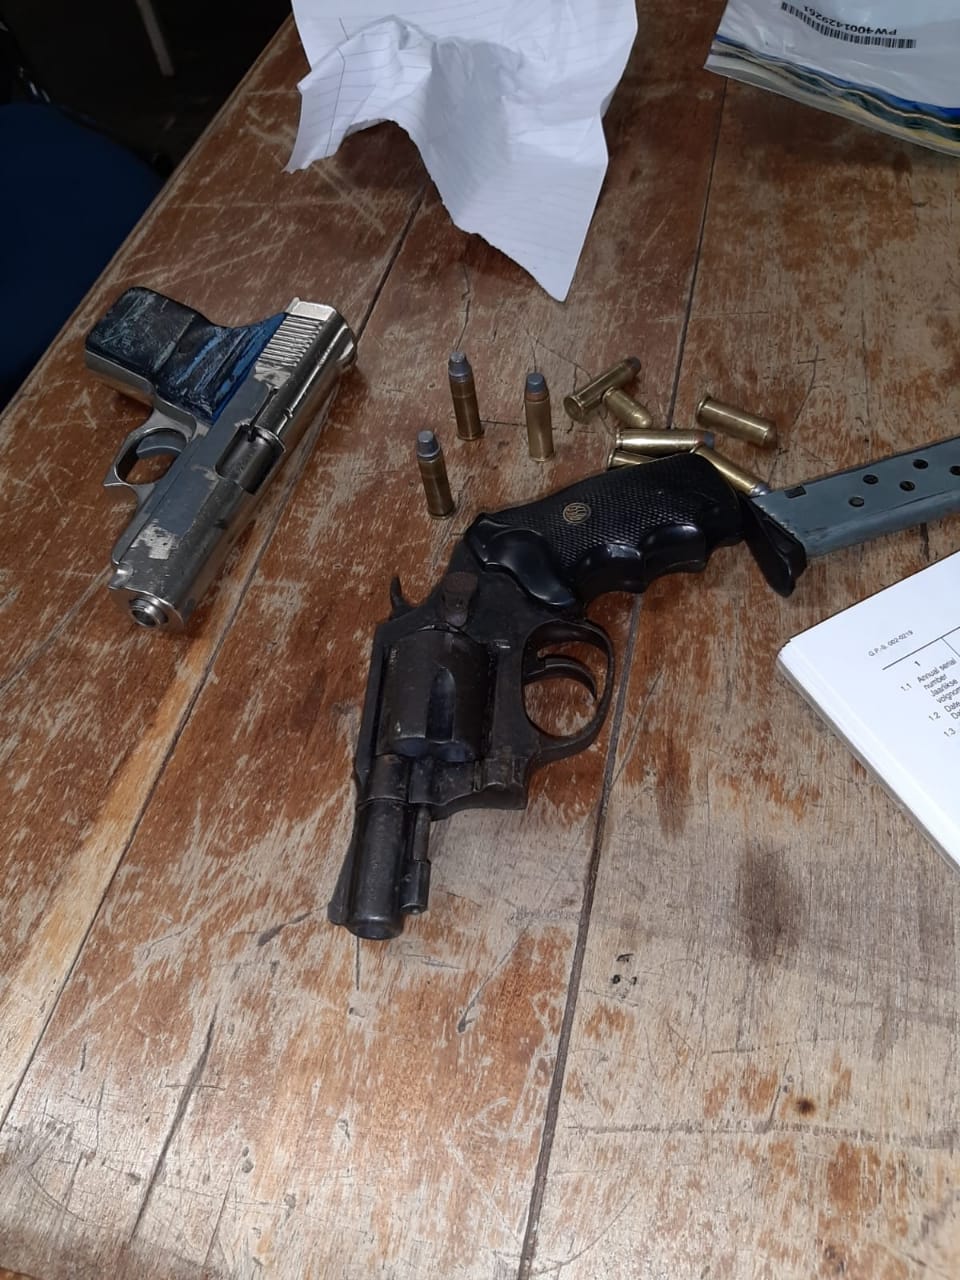 Six suspects arrested for possession of unlicensed firearms, ammunition and drugs